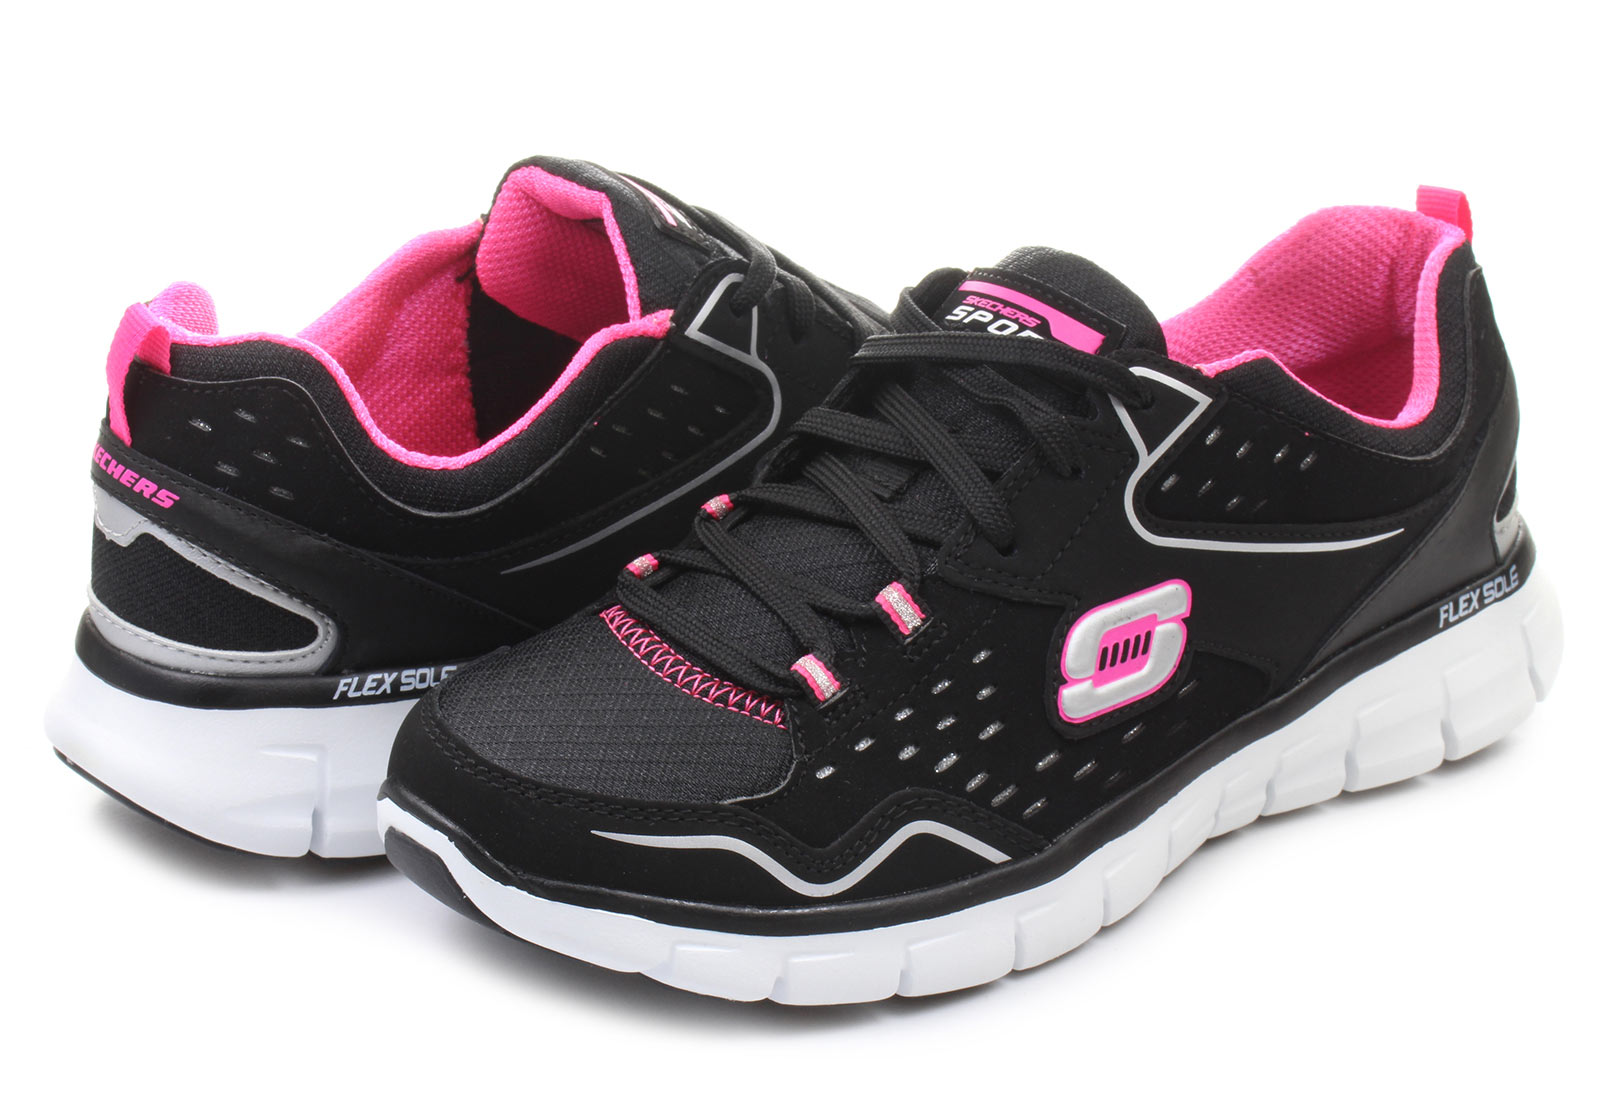 Skechers Shoes - Front Row - 12013-BKHP - Online shop for sneakers ...